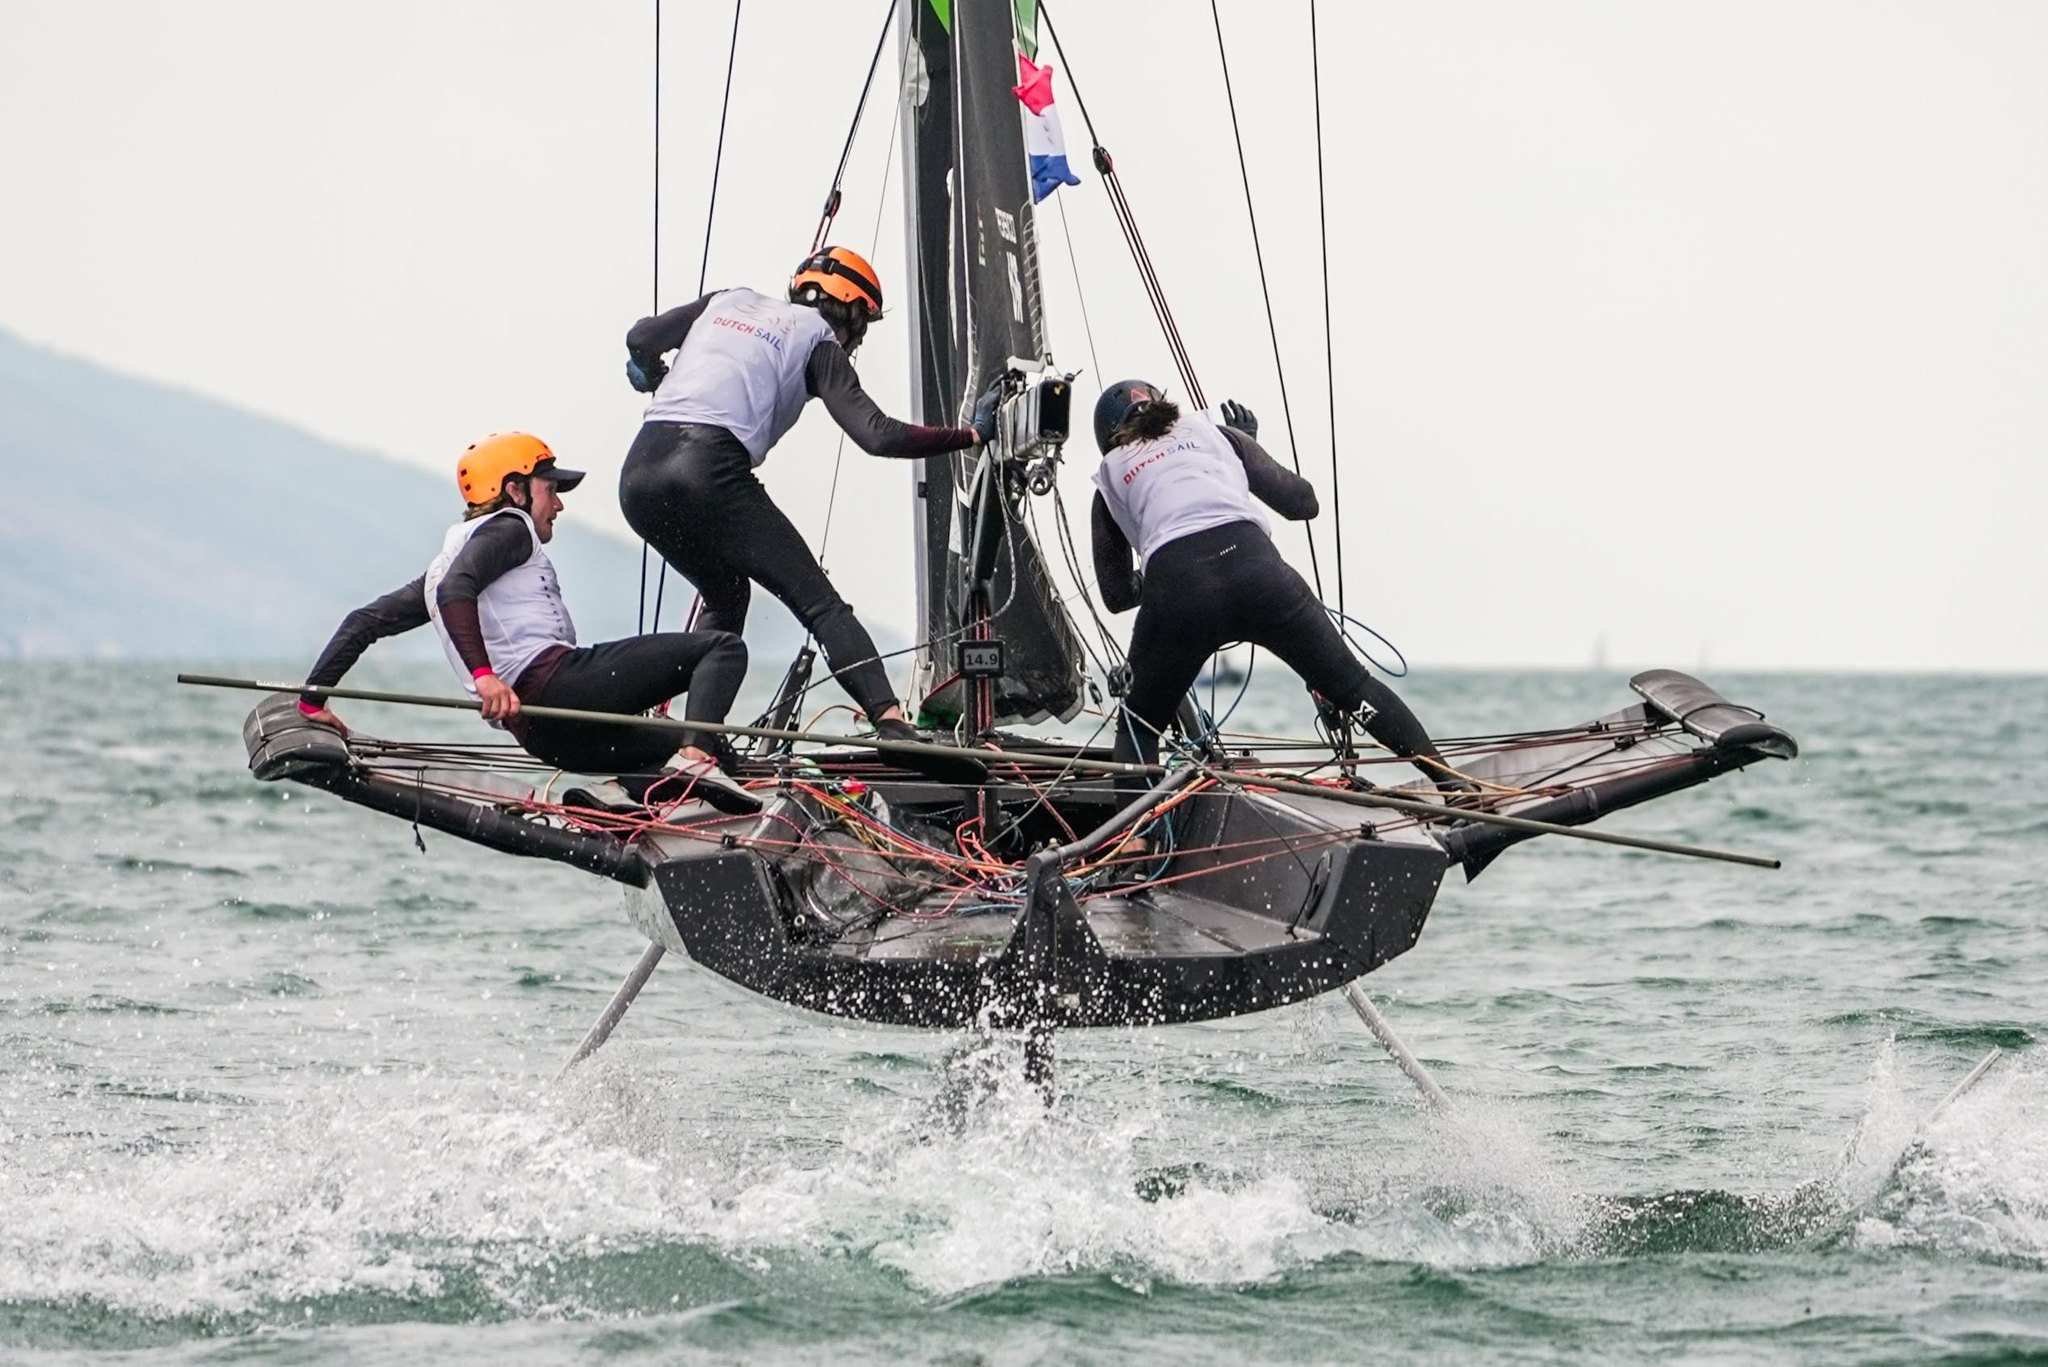  Persico 69F  Youth Foiling Gold Cup  Act 4  Torbole ITA  Day 3